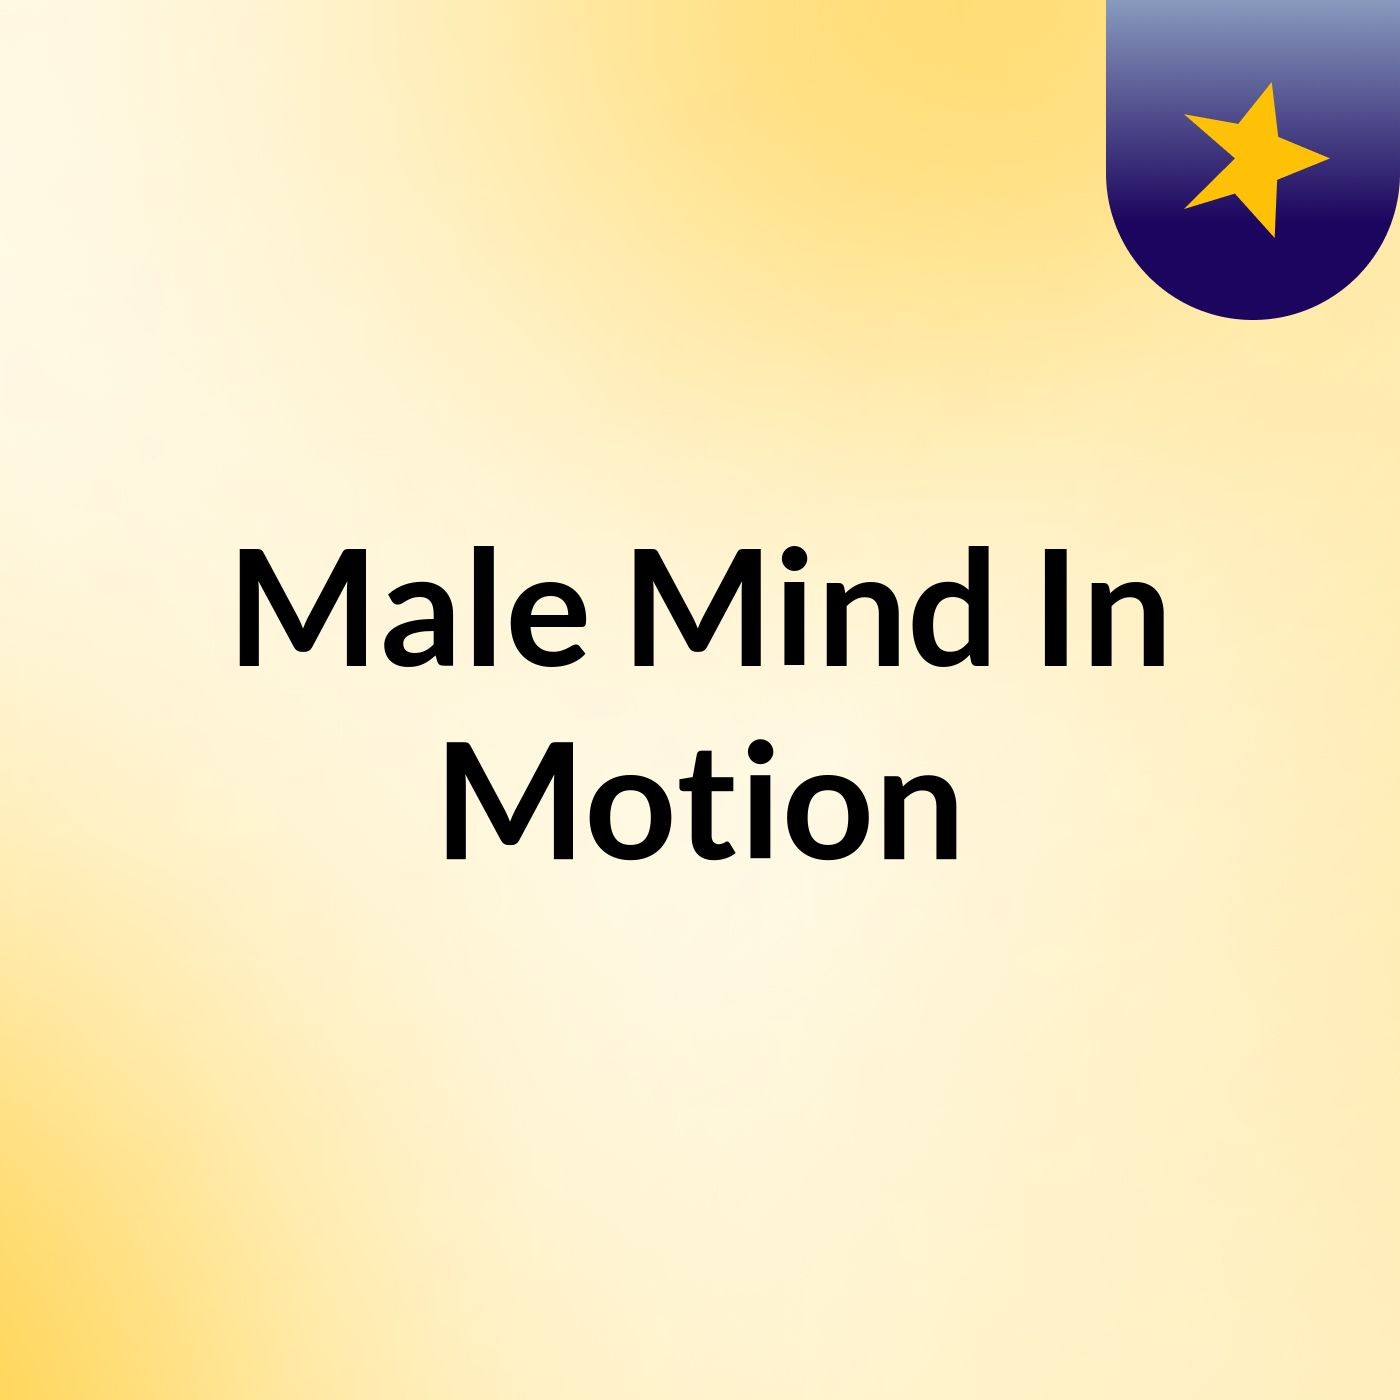 Male Mind In Motion